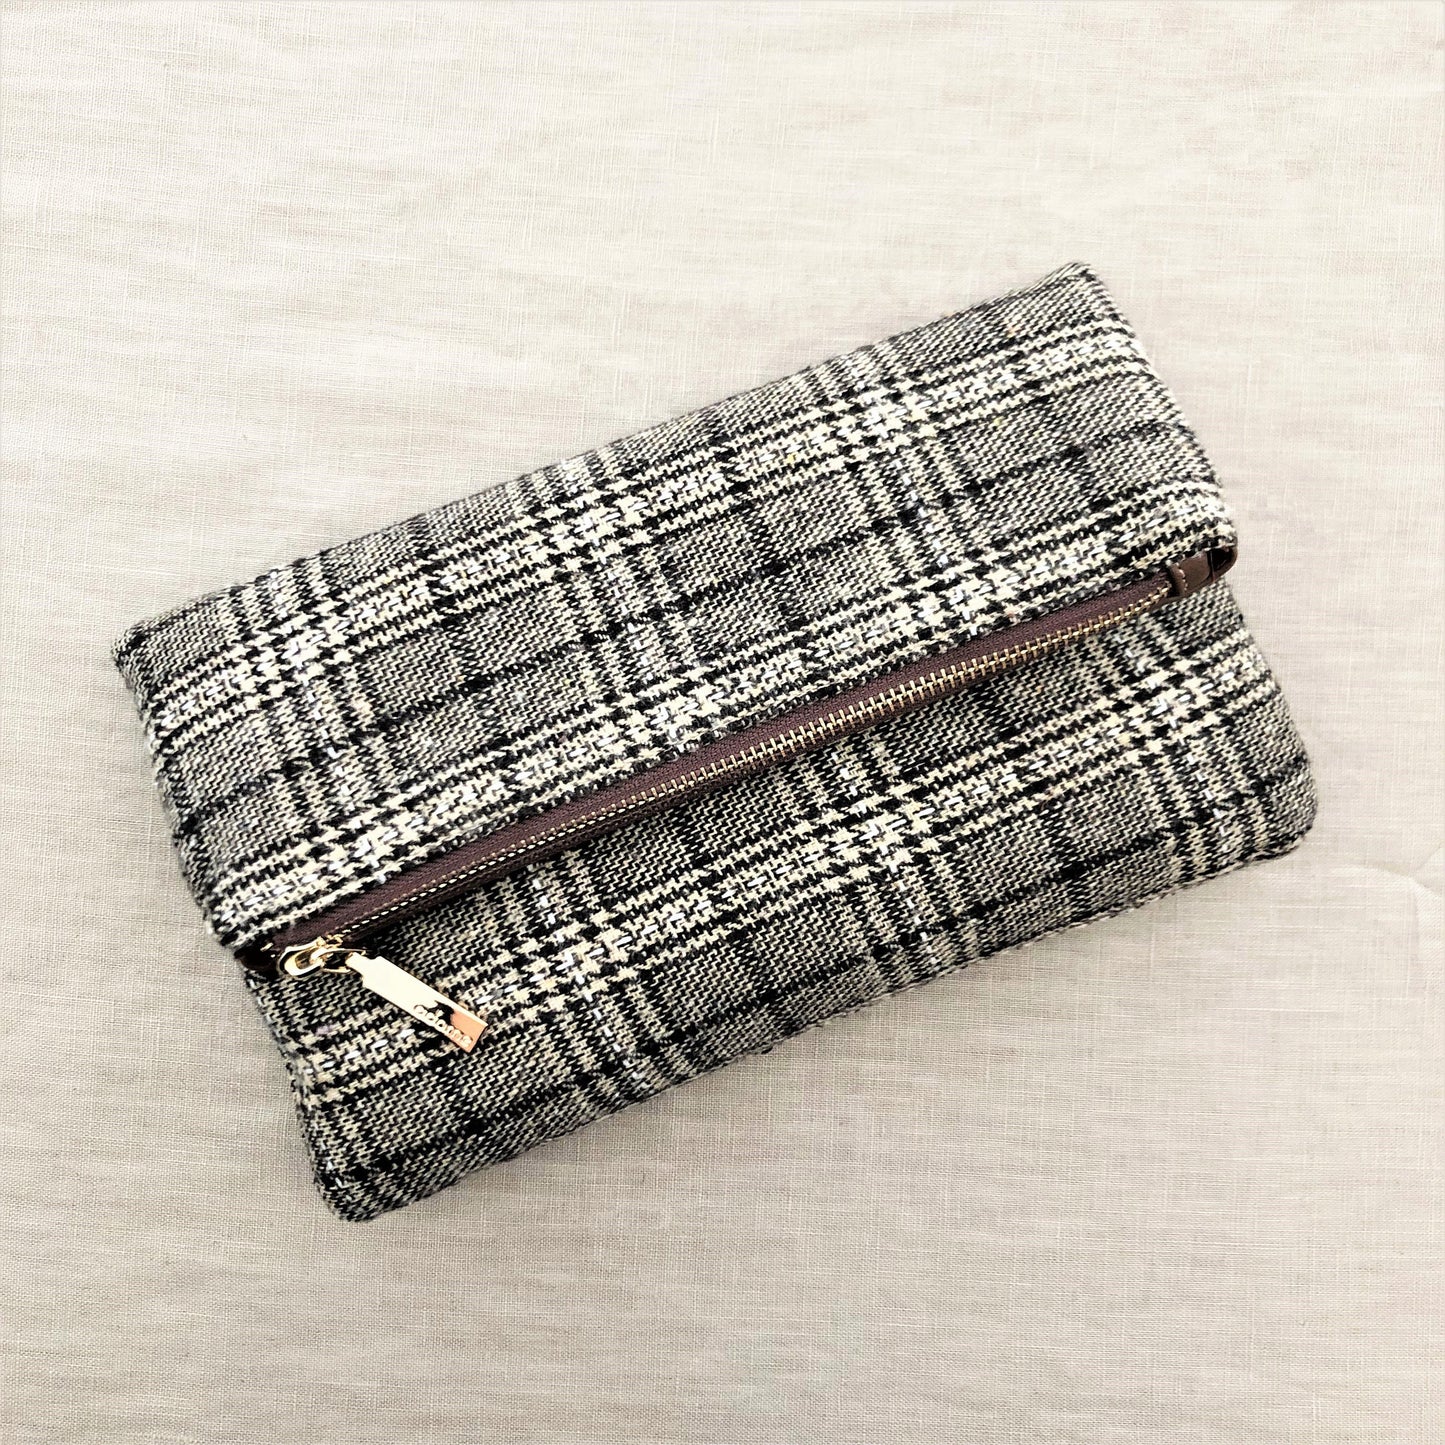 Tweed Bag Flap over Clutch in Chocolate and White and Black and White - sammi